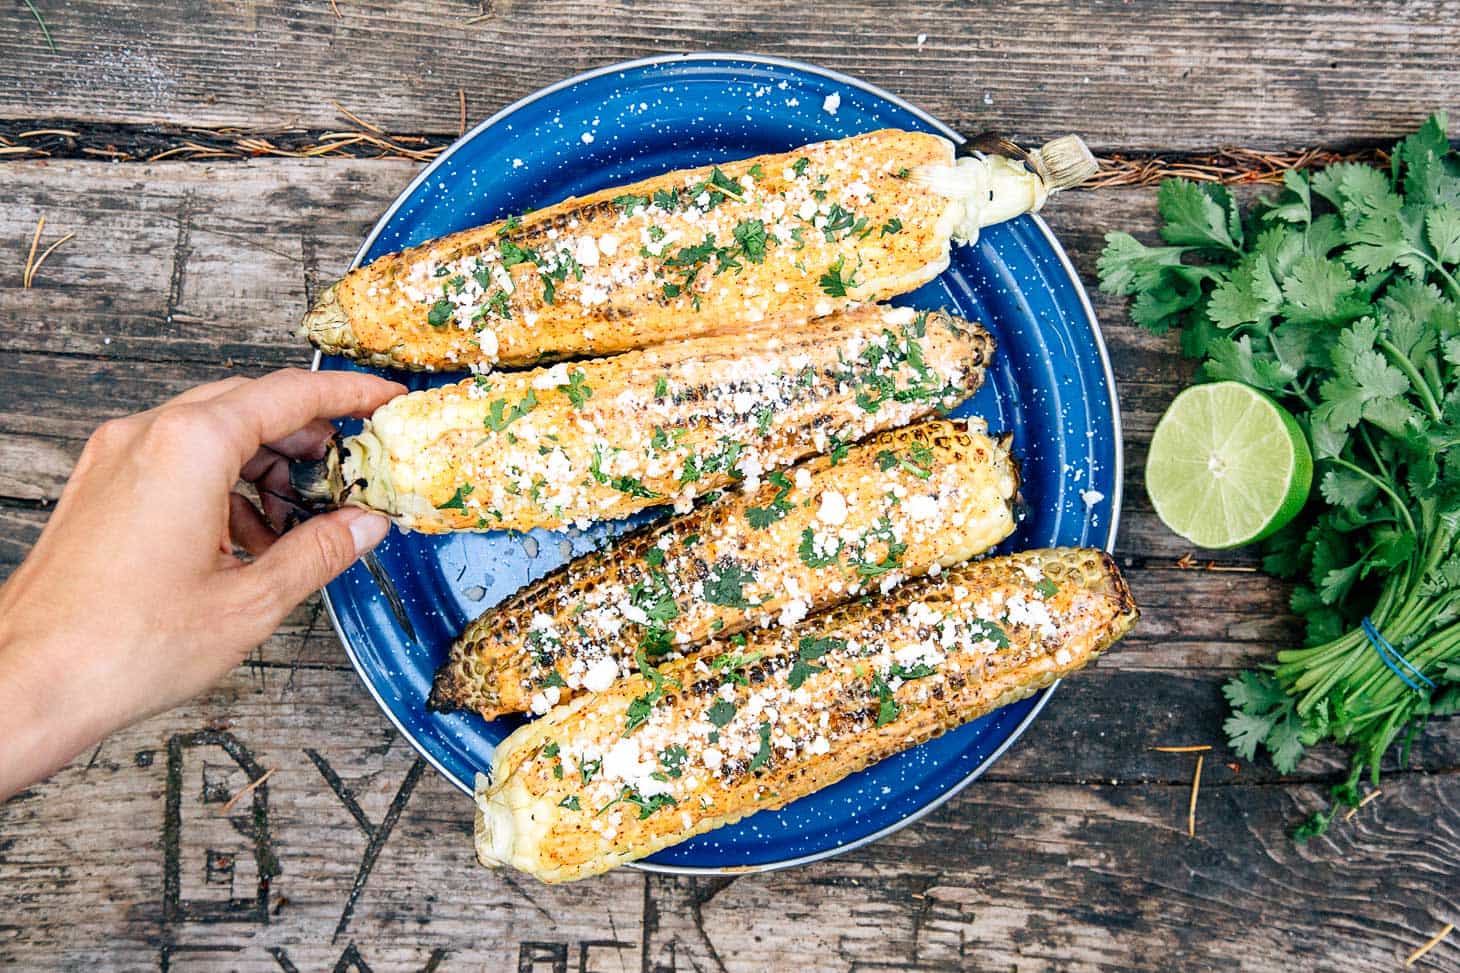 Four Elotes - grilled Mexican street corn - on a blue camping plate. A hand is reaching in to pick one up.